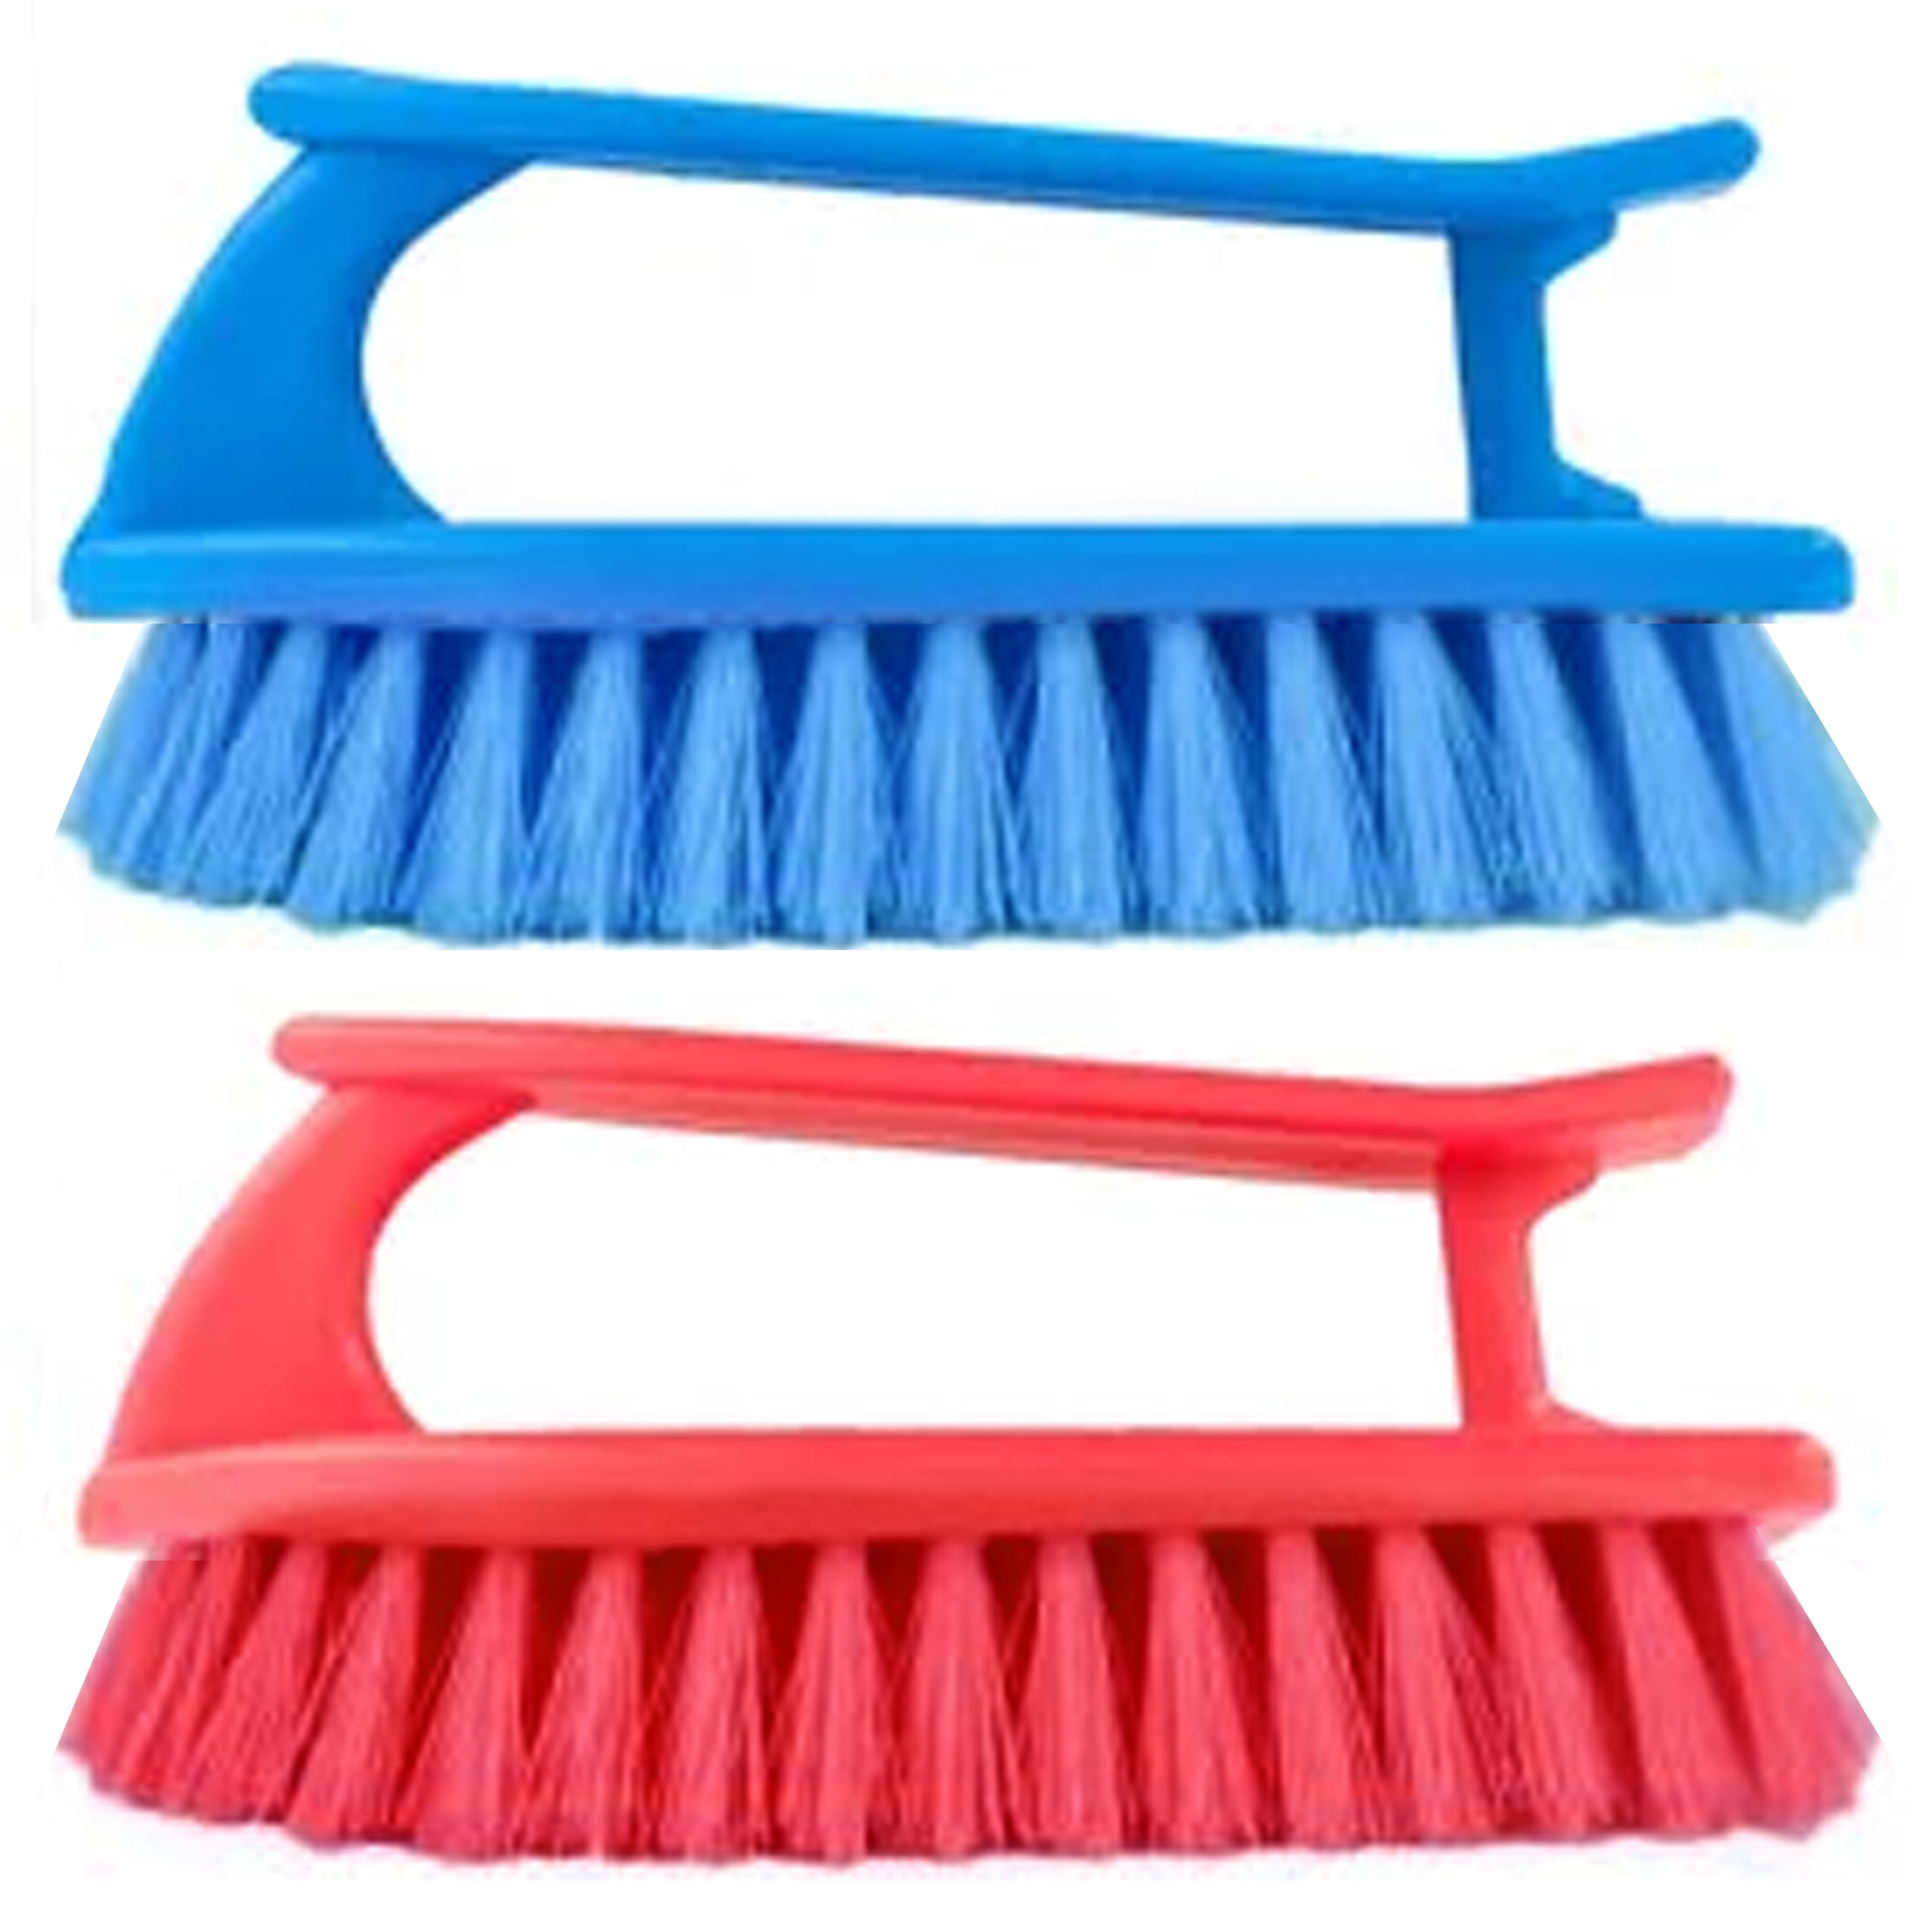 Mtfun Set of 4 Multifunctional Cleaning Brushes Set Replaceable Cleaning Heads Scrub Brush with Non-Slip Handle for Home Bathroom Kitchen Floor, Size